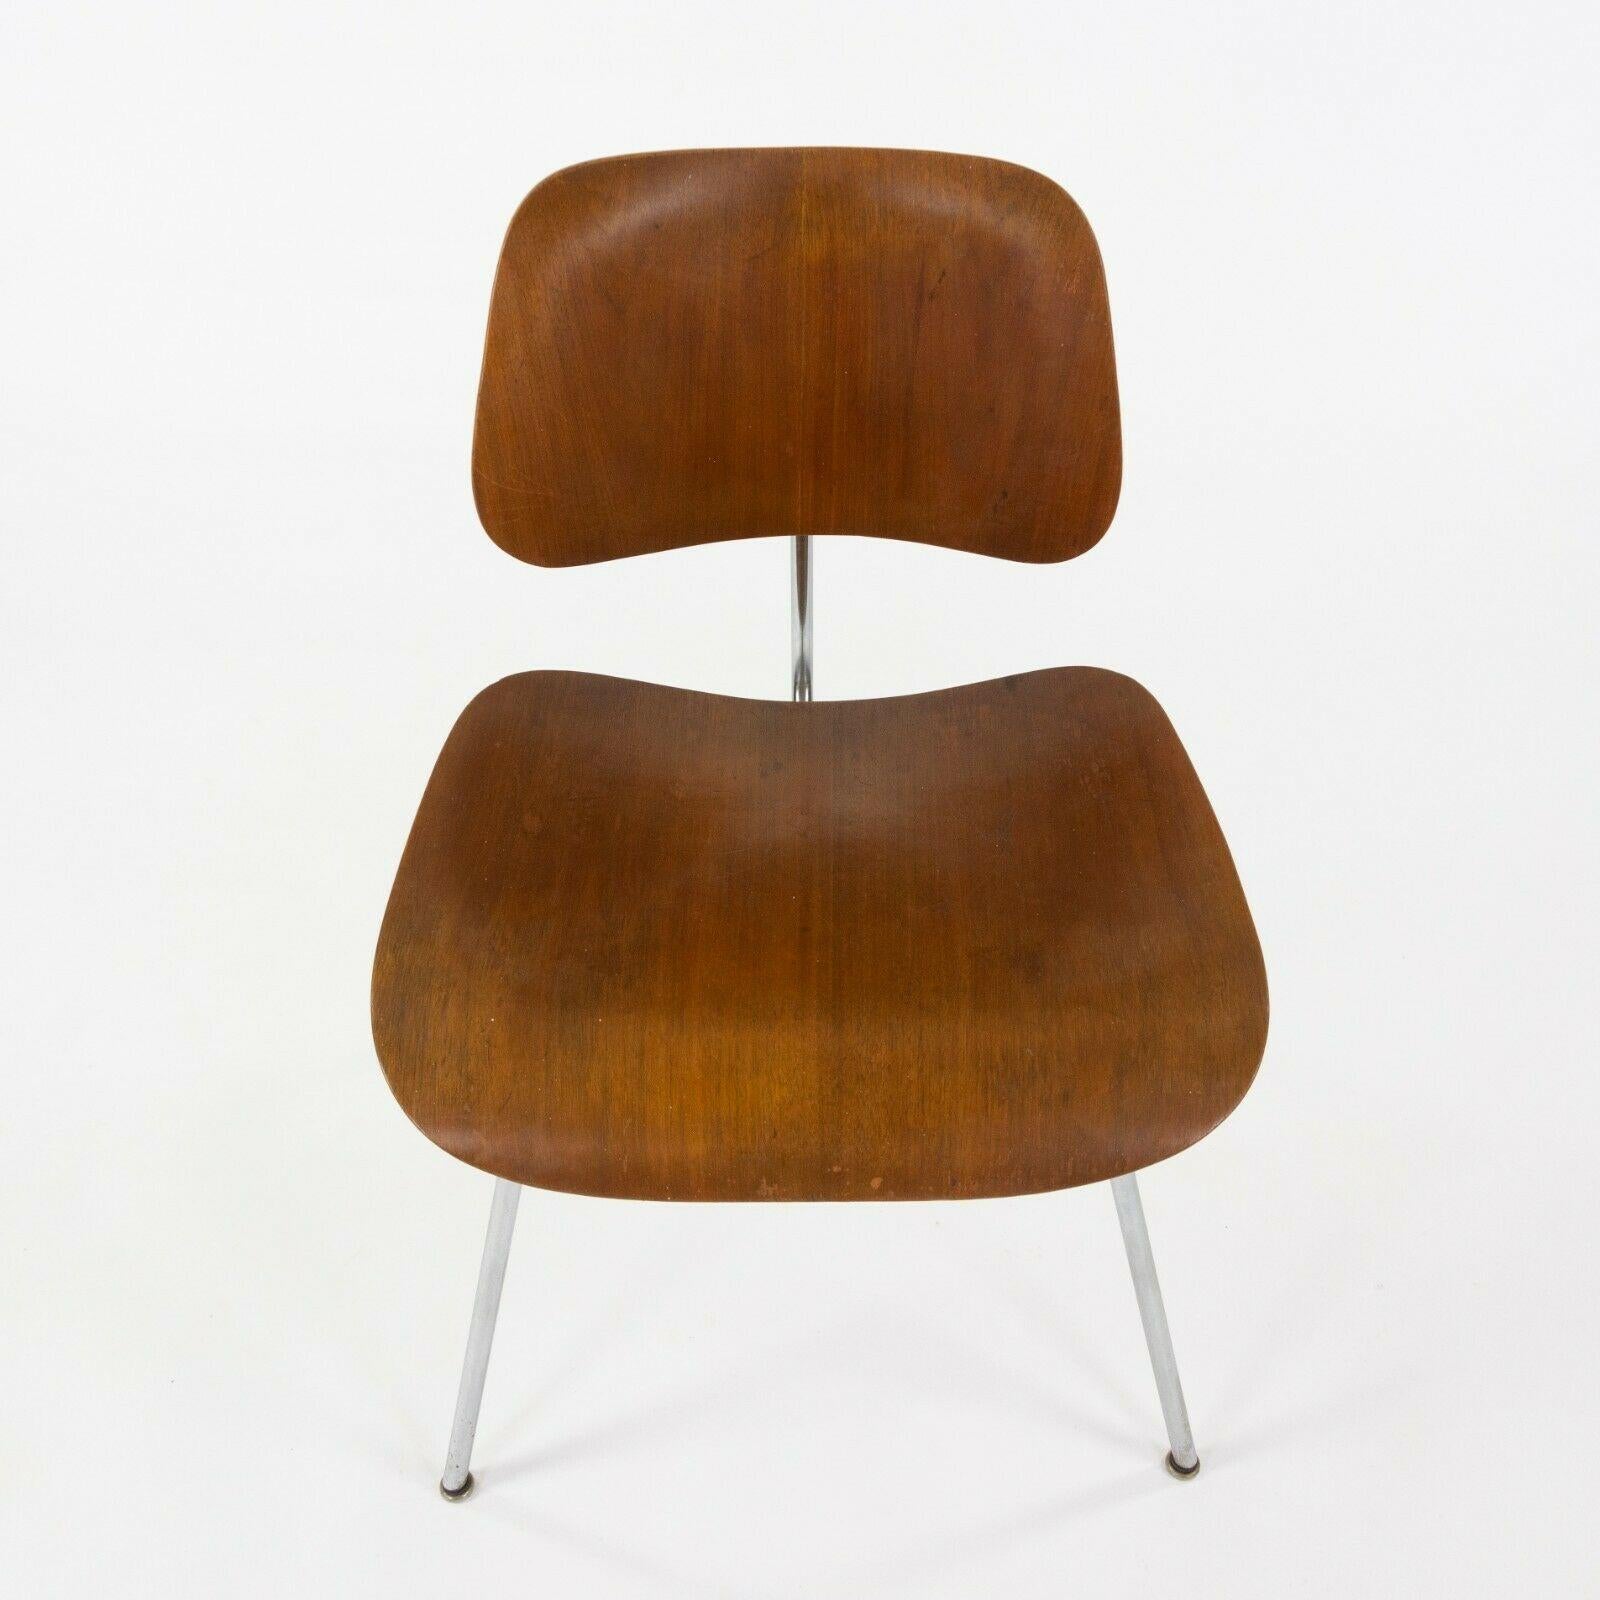 1948 Eames Evans for Herman Miller DCM Dining Chairs Metal in Walnut Set of Four For Sale 4